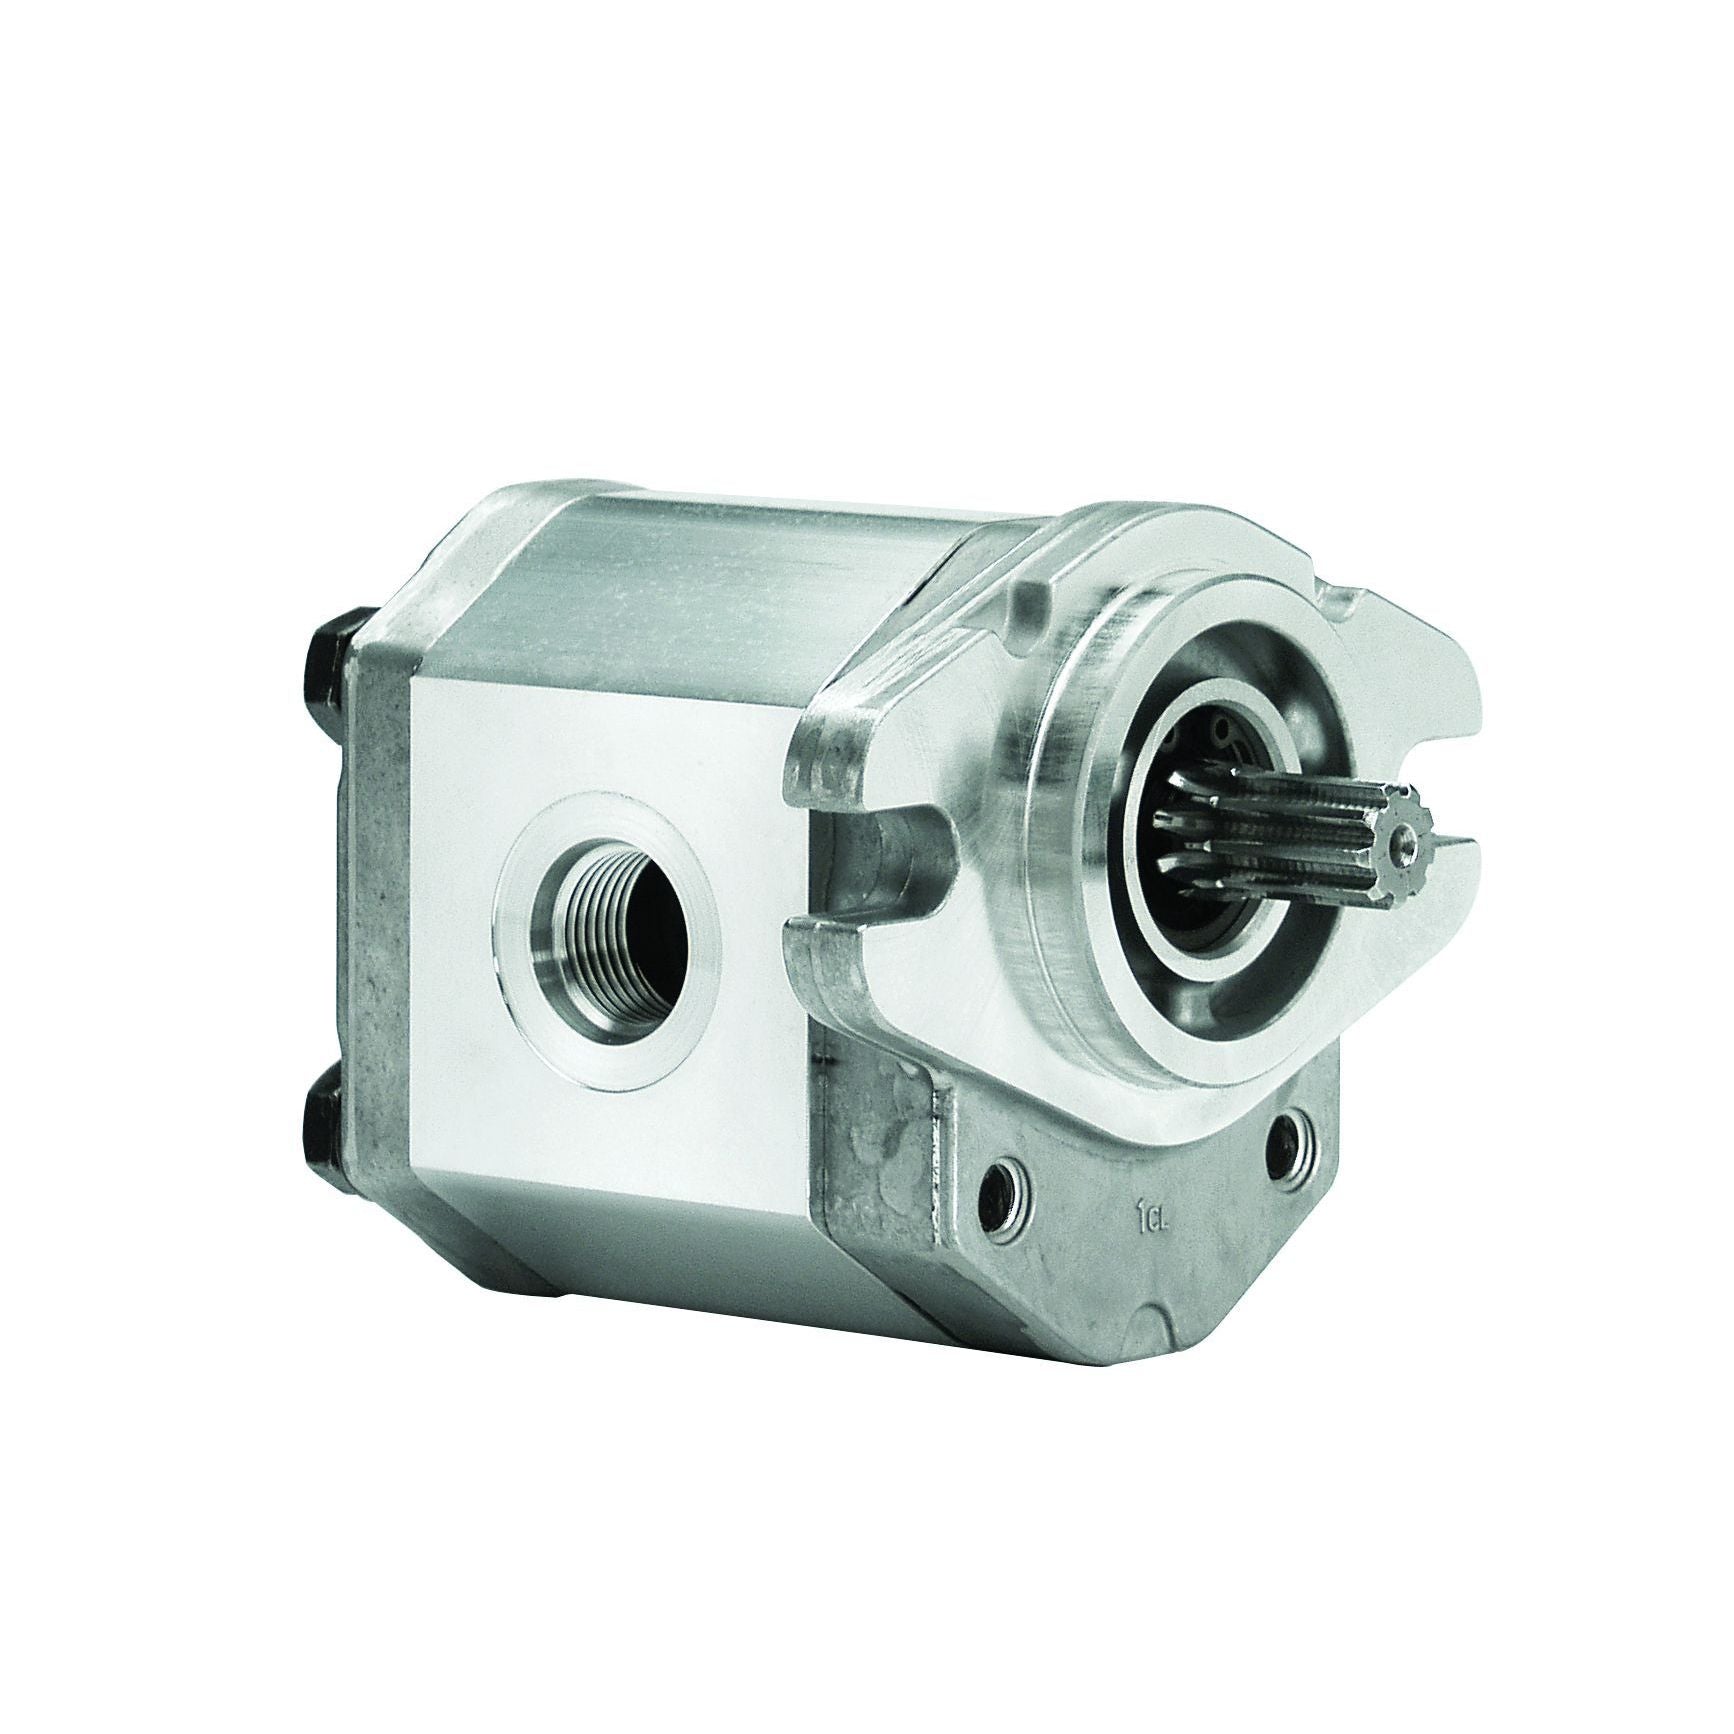 ALP1A-D-9-S1 : Marzocchi Gear Pump, CW, 6.2cc (0.3782in3), 2.95 GPM, 3335psi, 3000 RPM, #8 SAE (1/2") In, #6 SAE (3/8") Out, Splined Shaft 9T 20/40DP, SAE AA 2-Bolt Mount